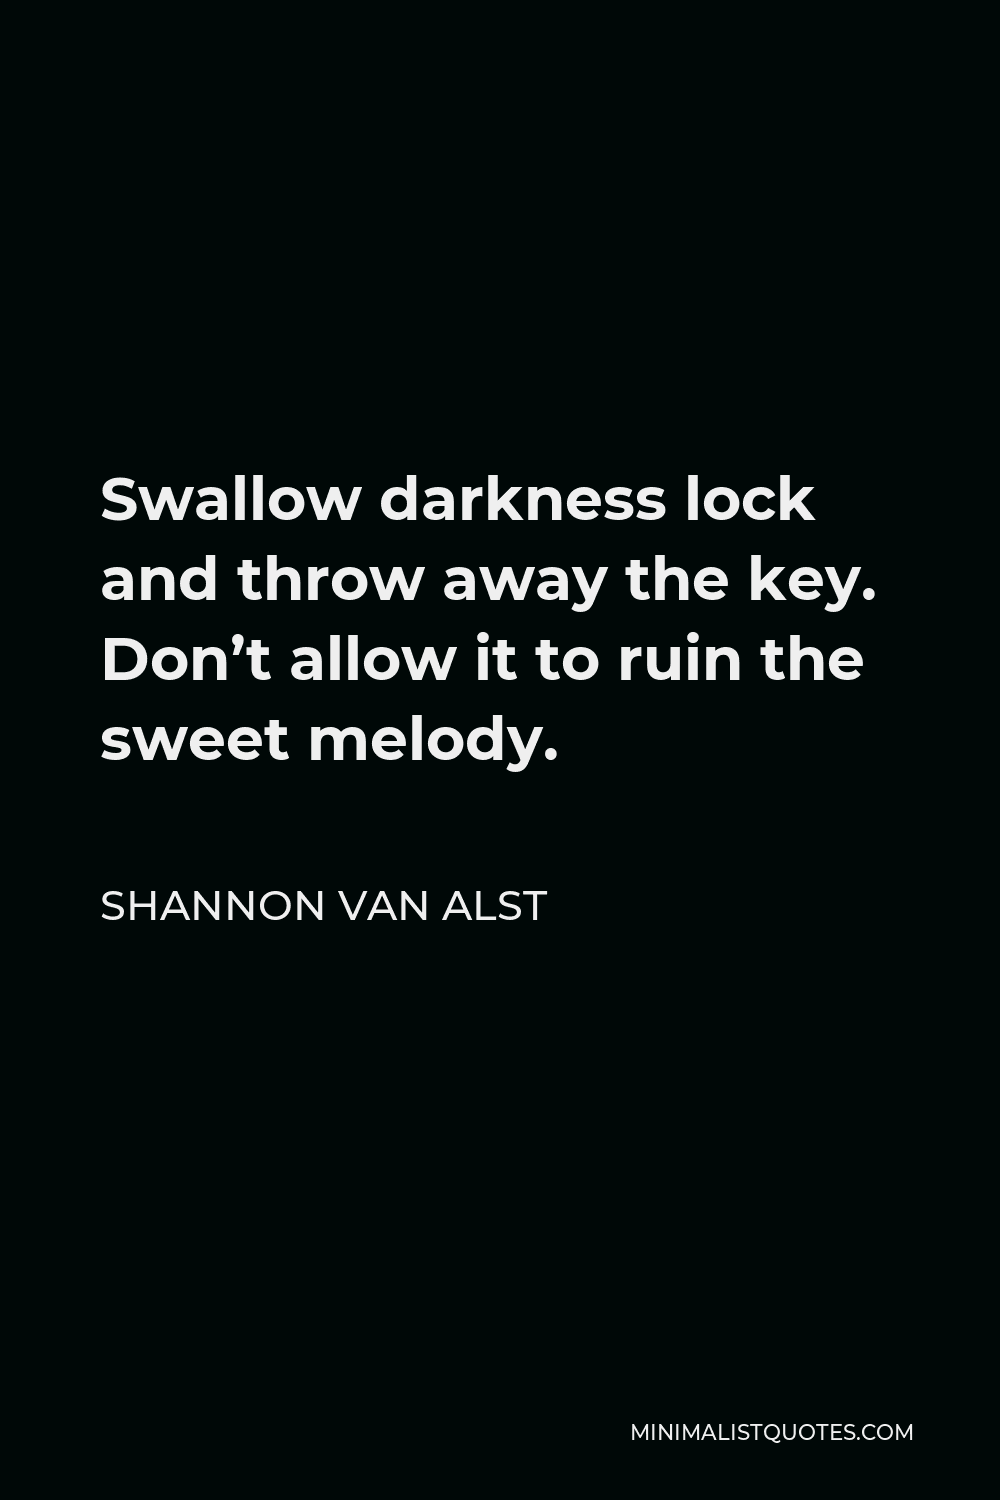 Shannon Van Alst Quote - Swallow darkness lock and throw away the key. Don’t allow it to ruin the sweet melody.